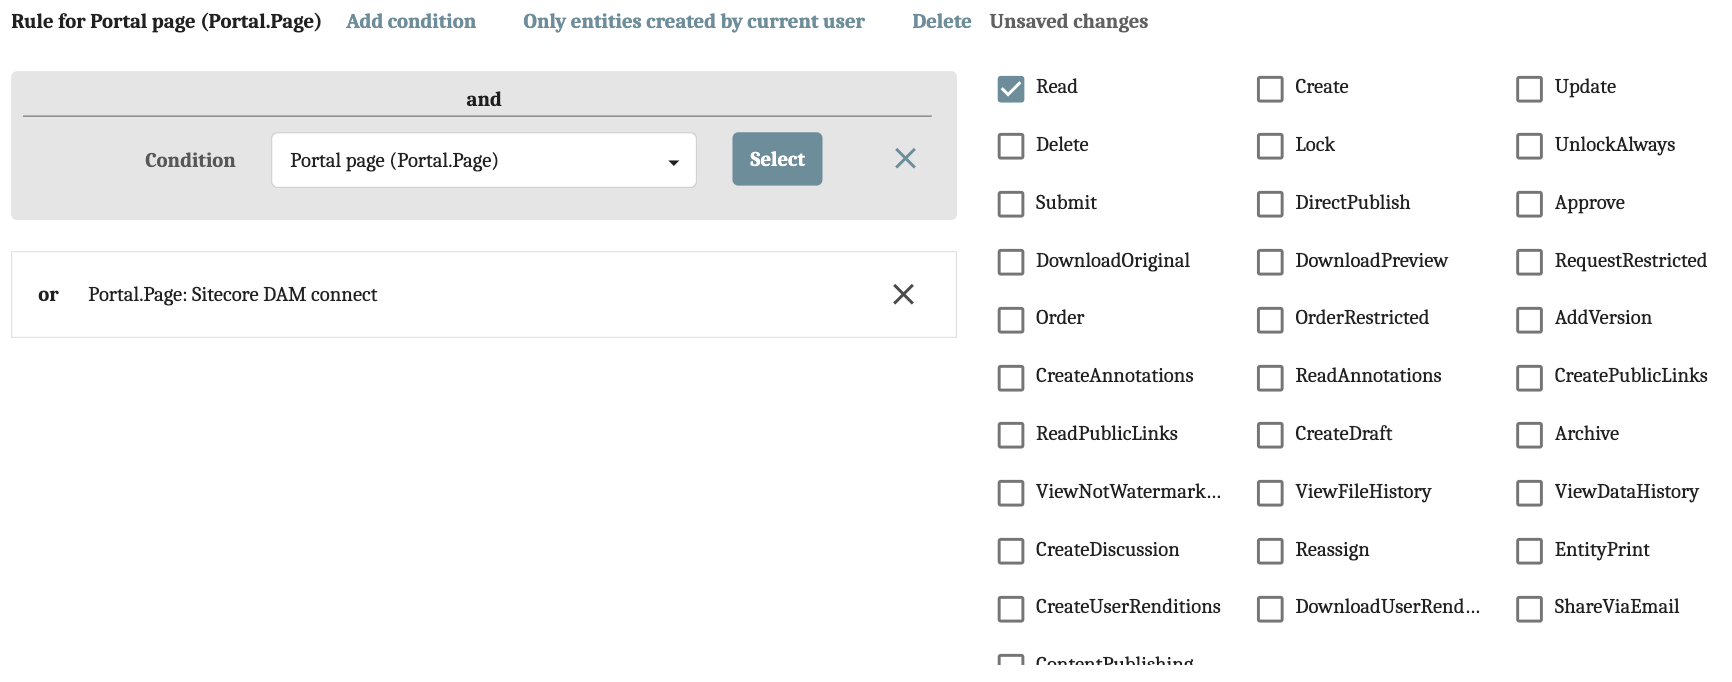 Rule for Portal.Page for Sitecore DAM Connect